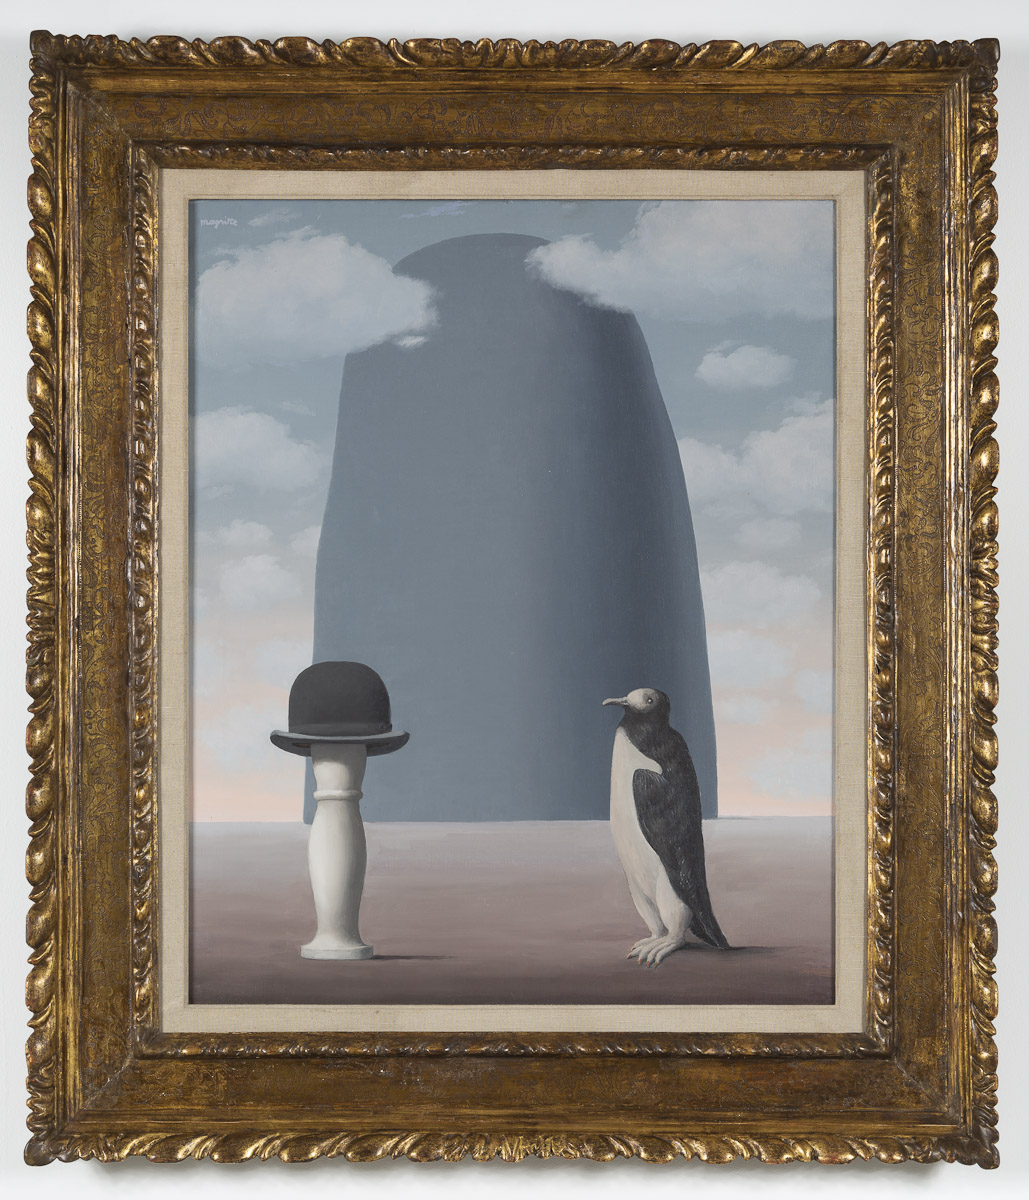 Rene Magritte,<i> L’exposition de peinture (The painting exhibition)</i>, 1964, Oil on canvas, 31 1/2 x 25 5/8 inches (80 x 65 cm)